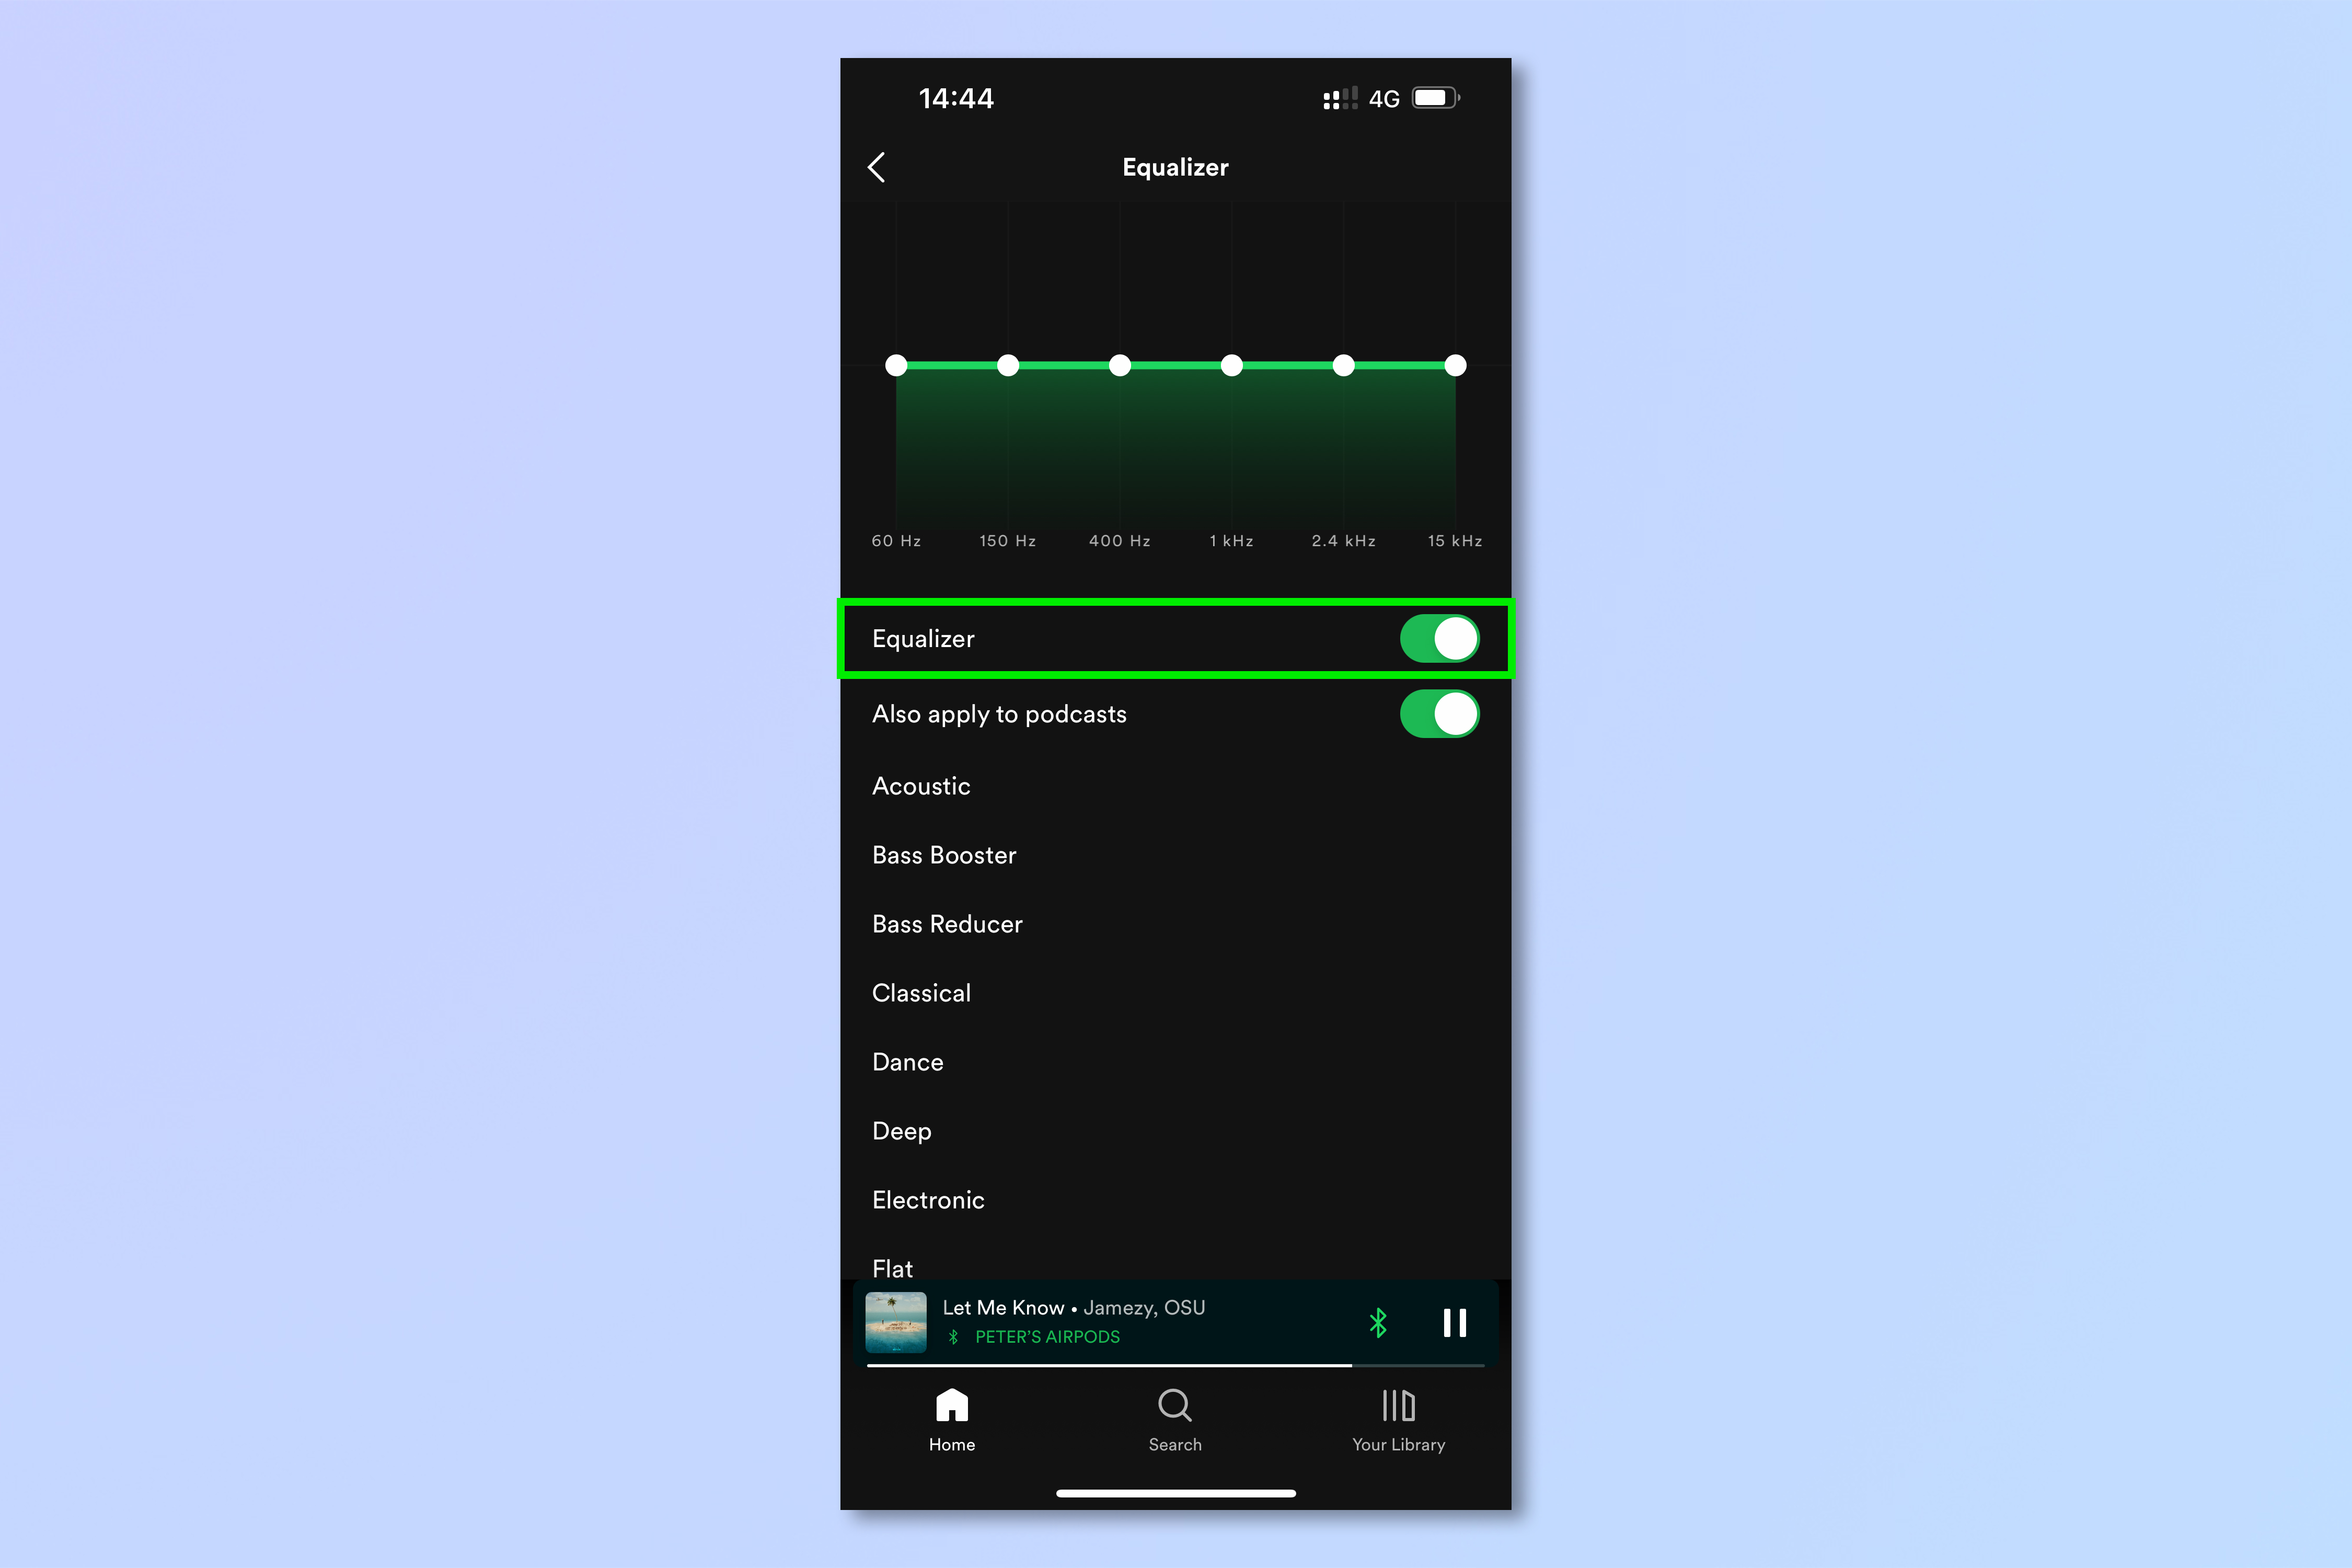 A screenshot showing the steps required to use the Spotify equalizer on iOS and Android